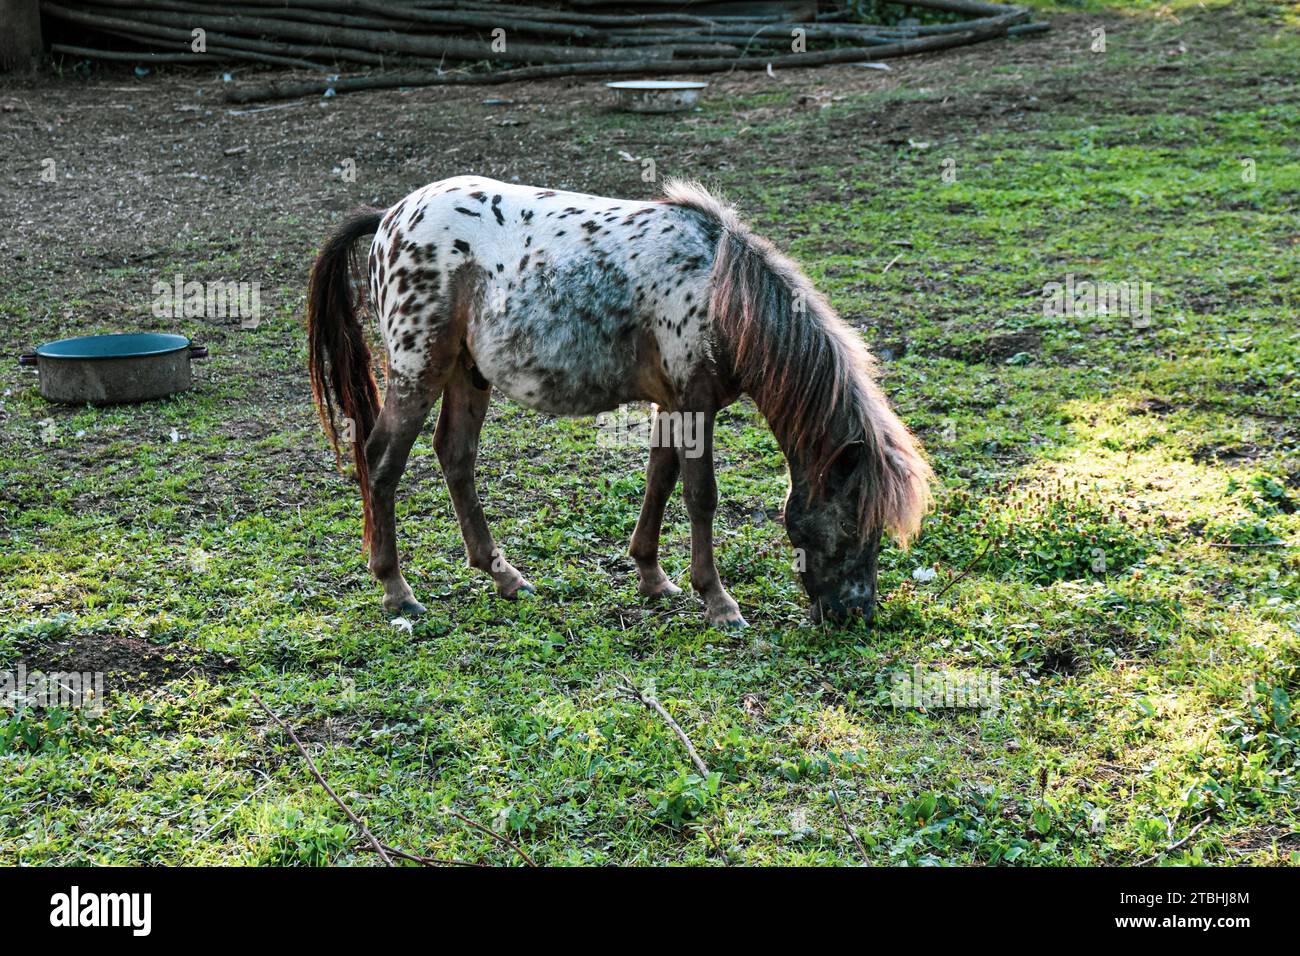 A white pony horse with a white mane and brown markings. It stands free and grazes on green, fresh grass. Stock Photo